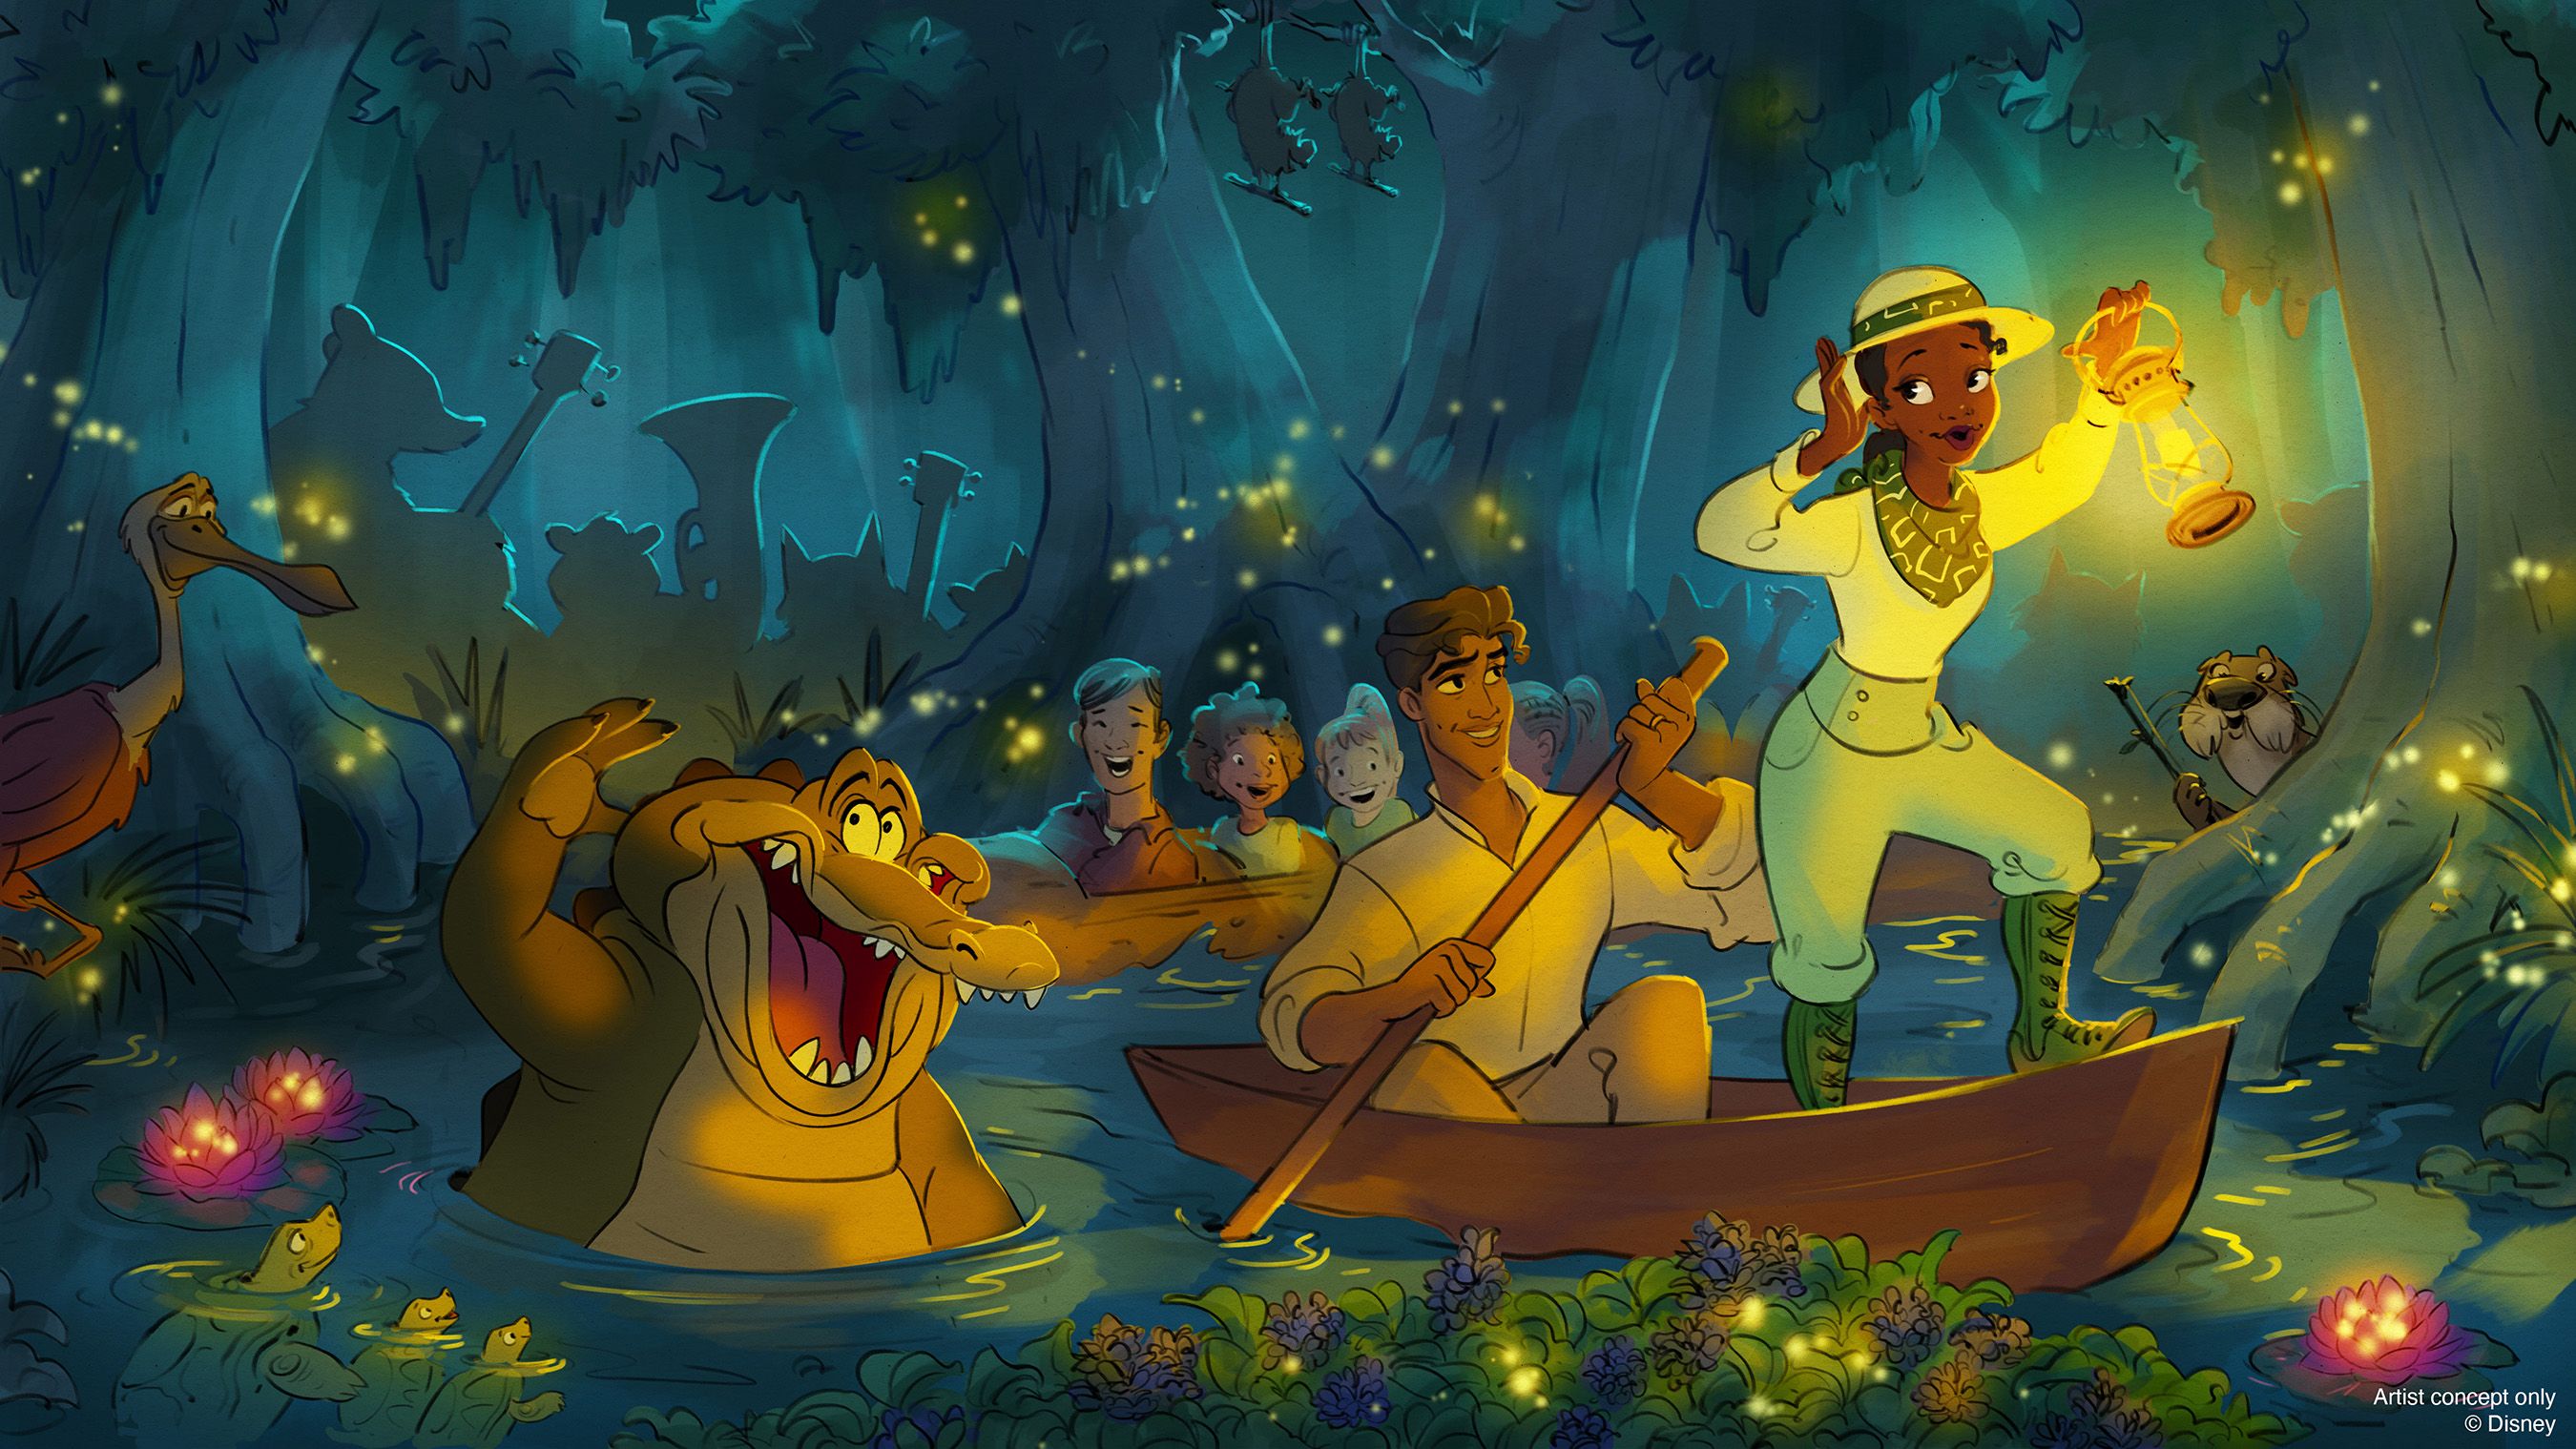 Image is a rendering of what the ride could look like. Tiana and Naveen are in a boat in the water. She holds a lantern. Louis the gator smiles and swims next to them. Fireflies light up the swamp.